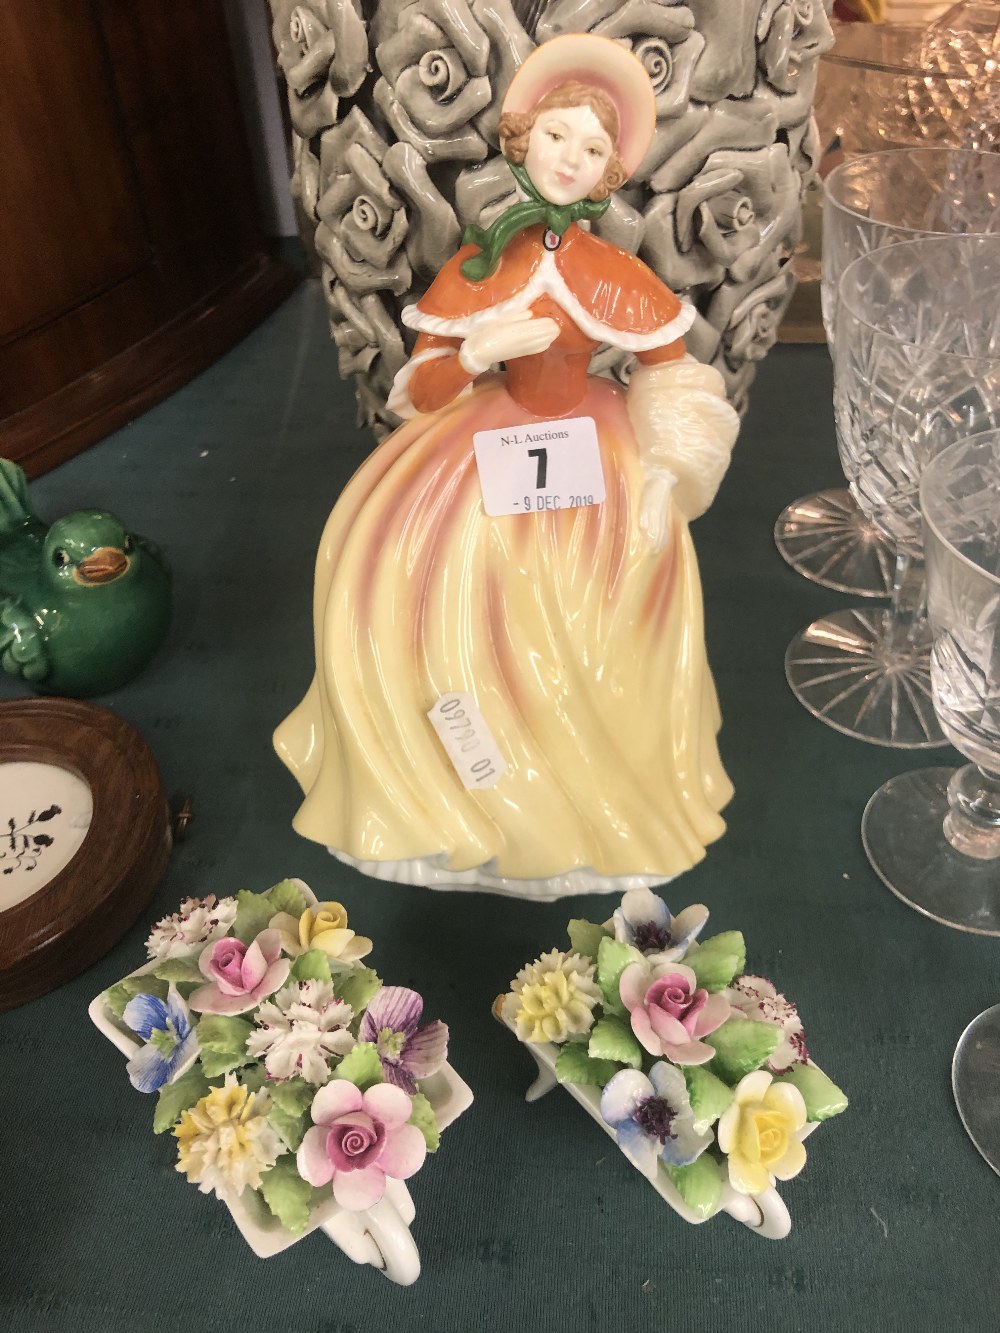 A Royal Doulton figurine and two Doulton posies